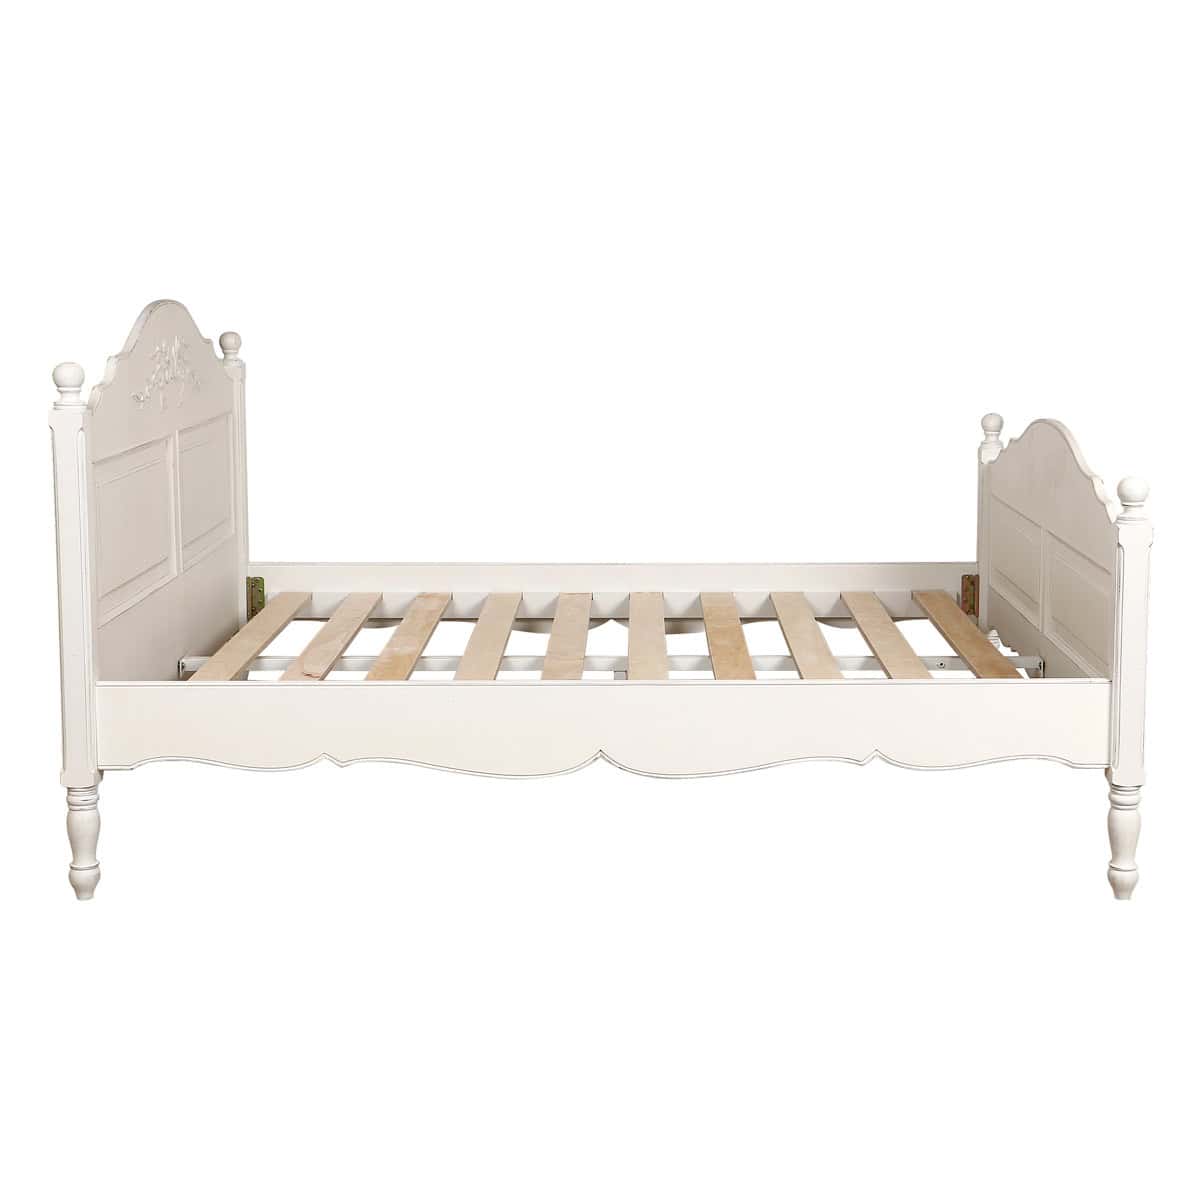 French Queen Bed Frame - Romance – Low-cost Delivery, Nationwide